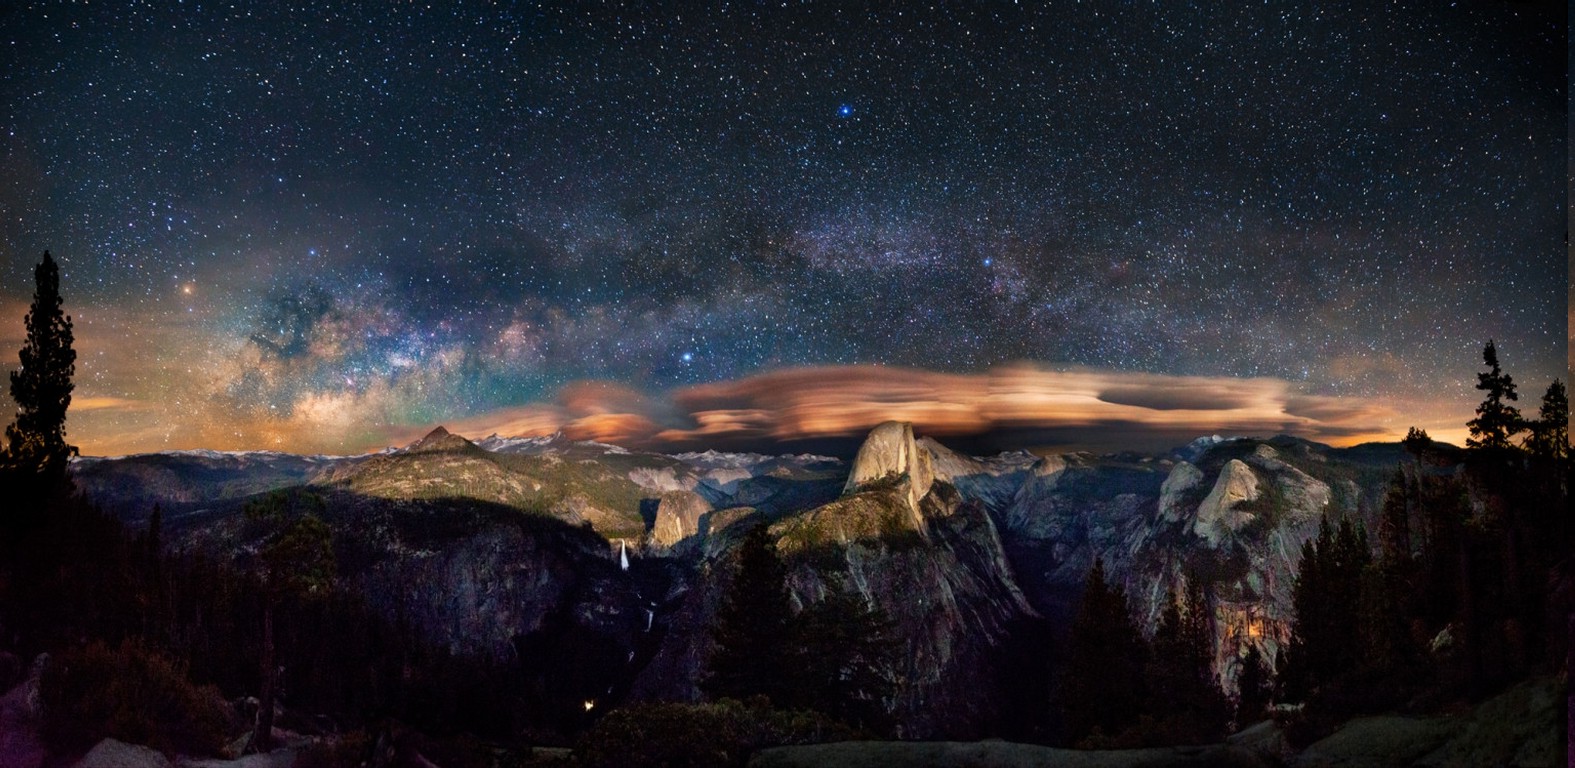 Yosemite National Park, Starry Night, Milky Way, Long Exposure, Mountain, Clouds, Forest, Panoramas, Nature, Landscape Wallpaper